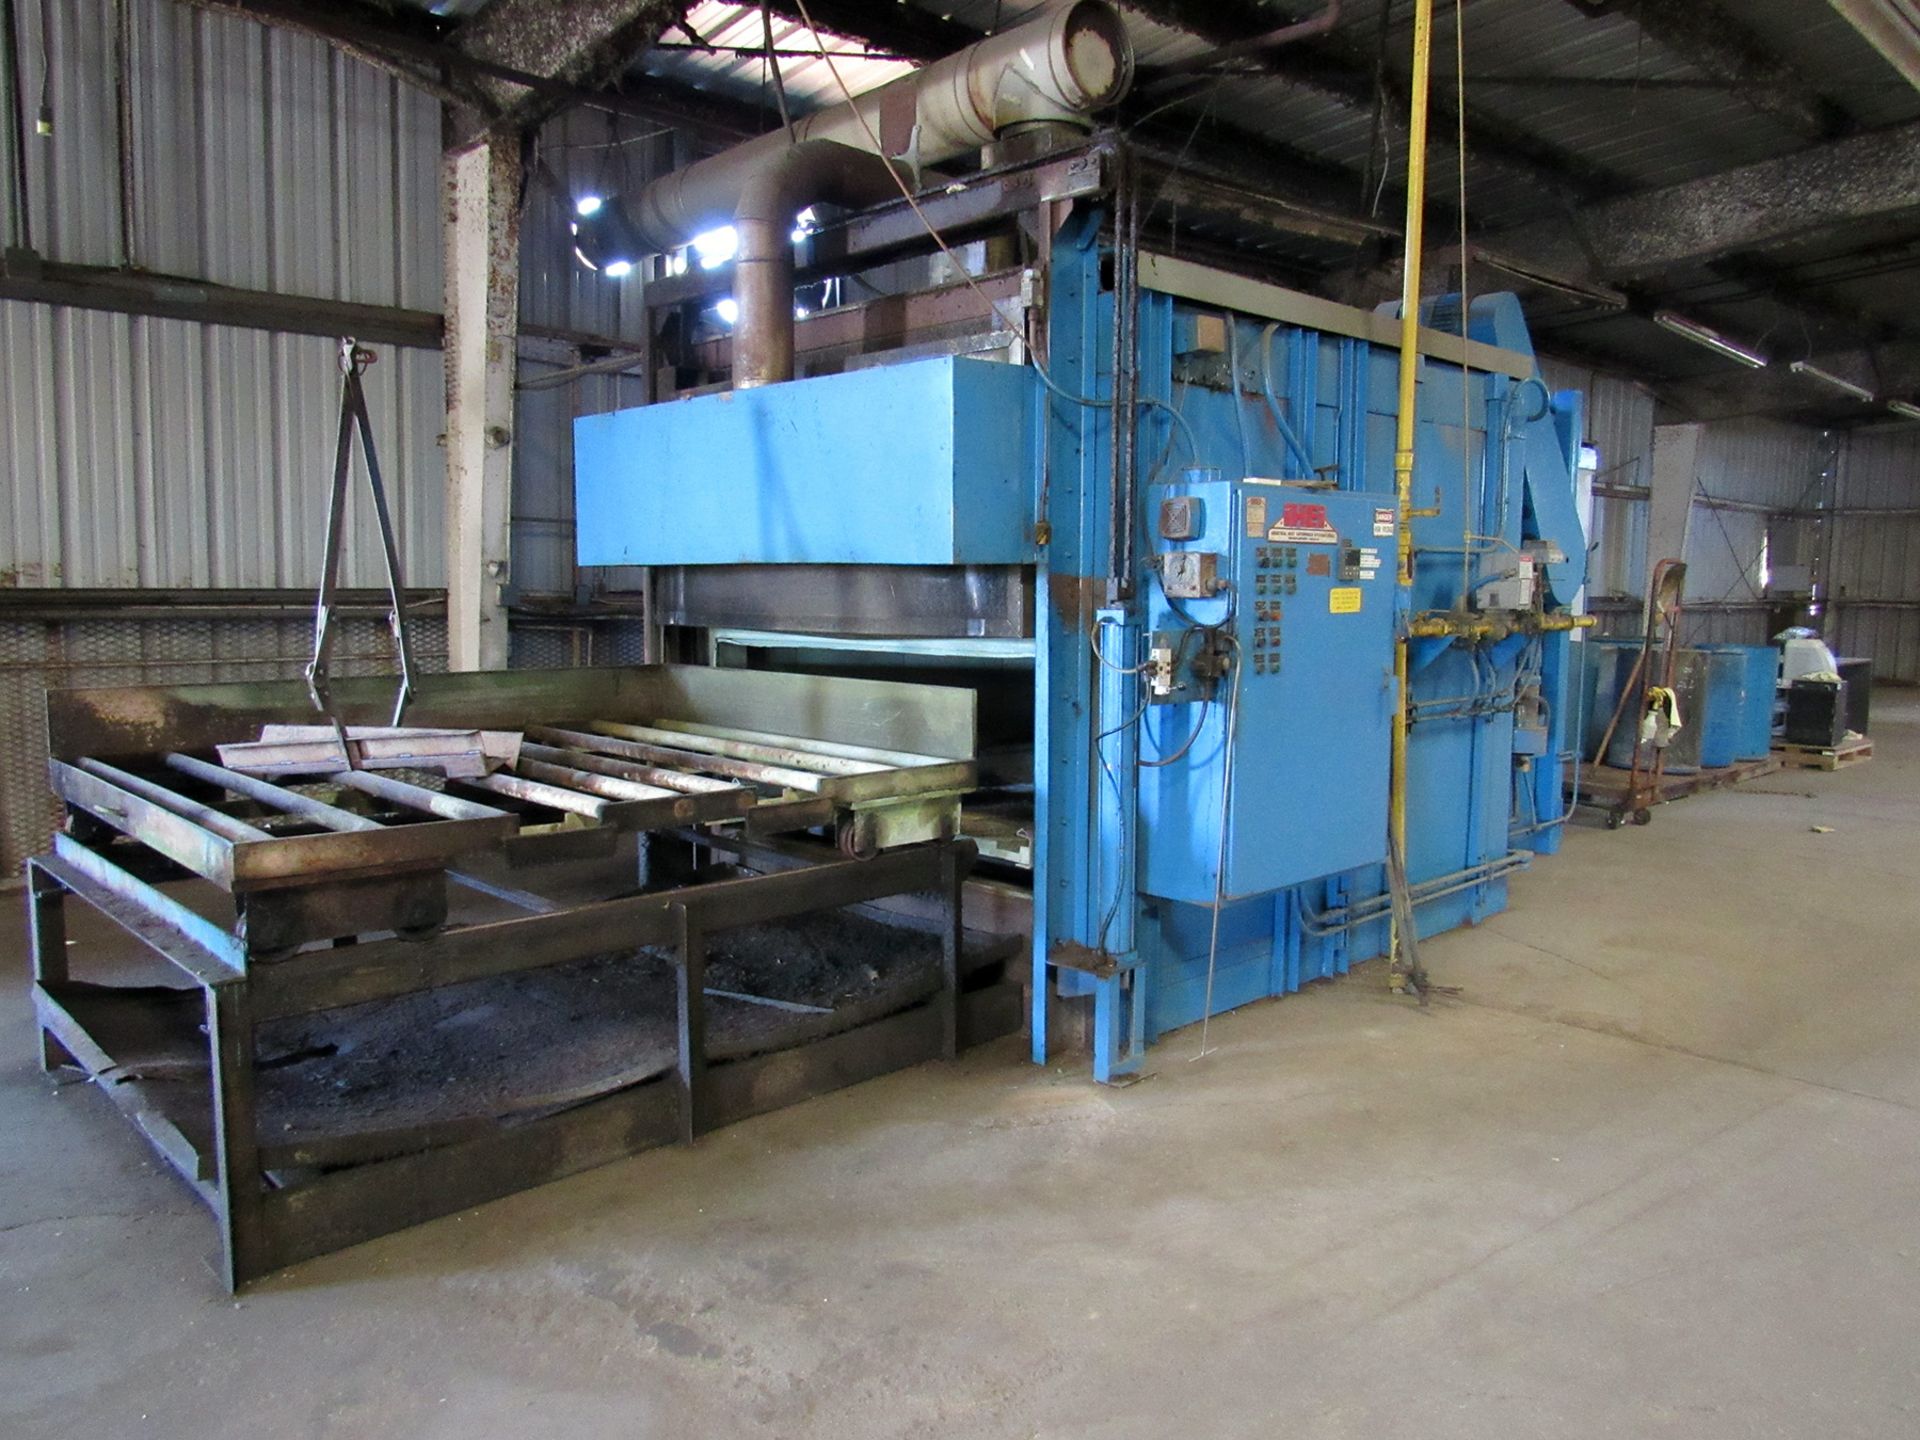 CORE BAKE OVEN, IHEI GAS FIRED BATCH, max. work opening: 72"W. x 30" ht., max. core length: 72", 800